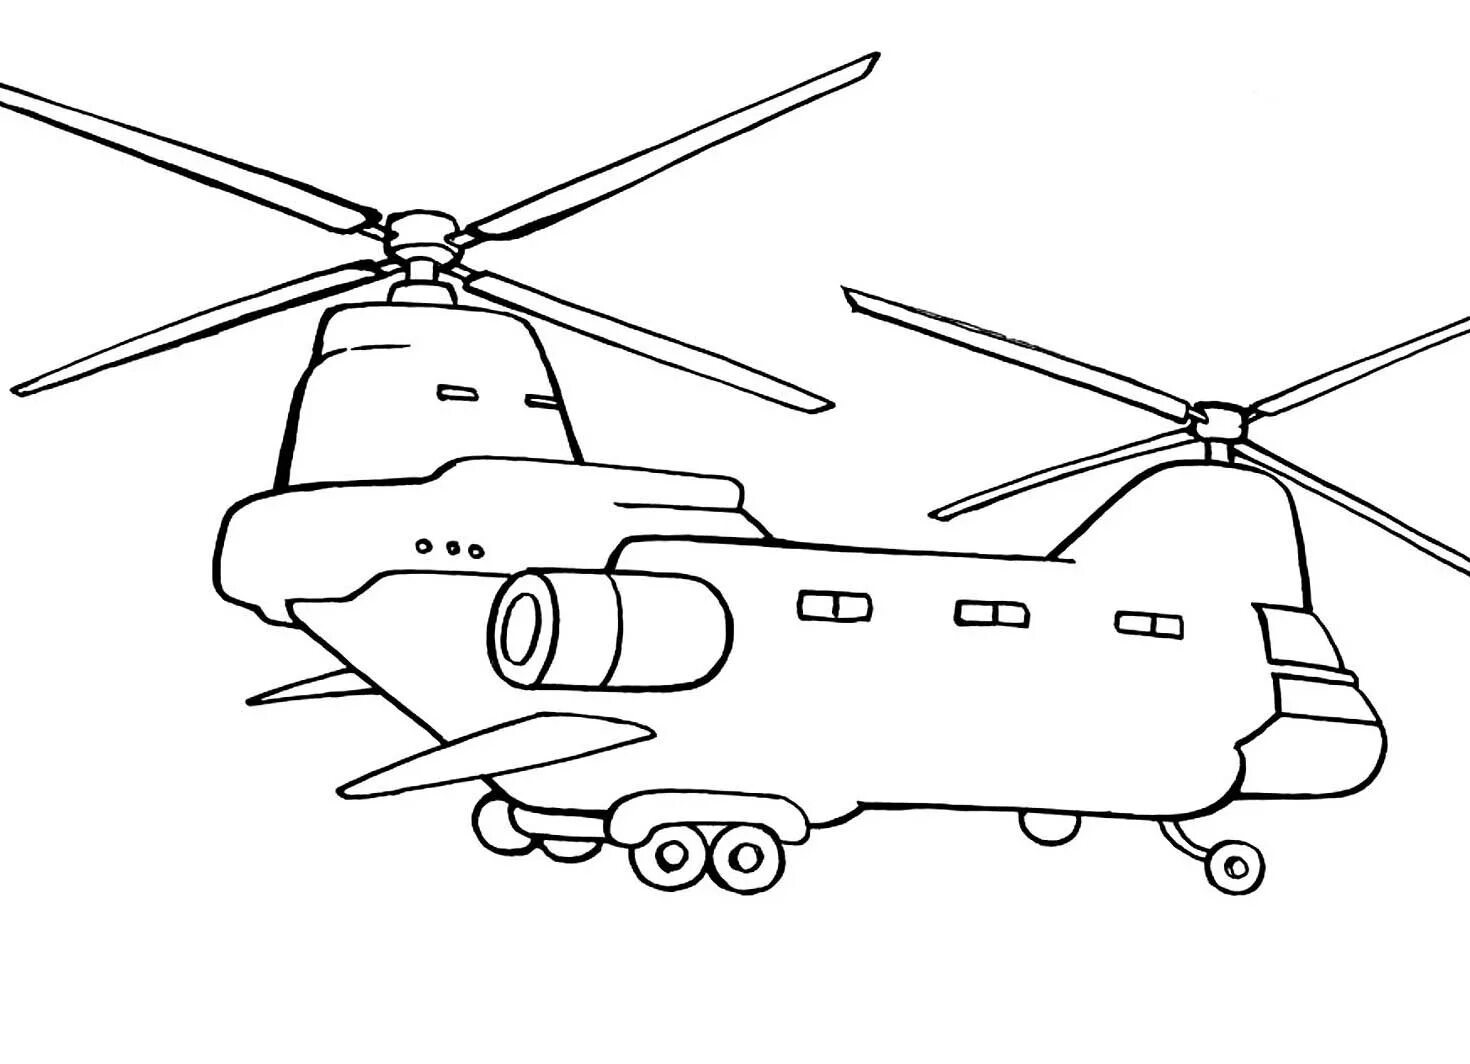 Military helicopter for kids #4